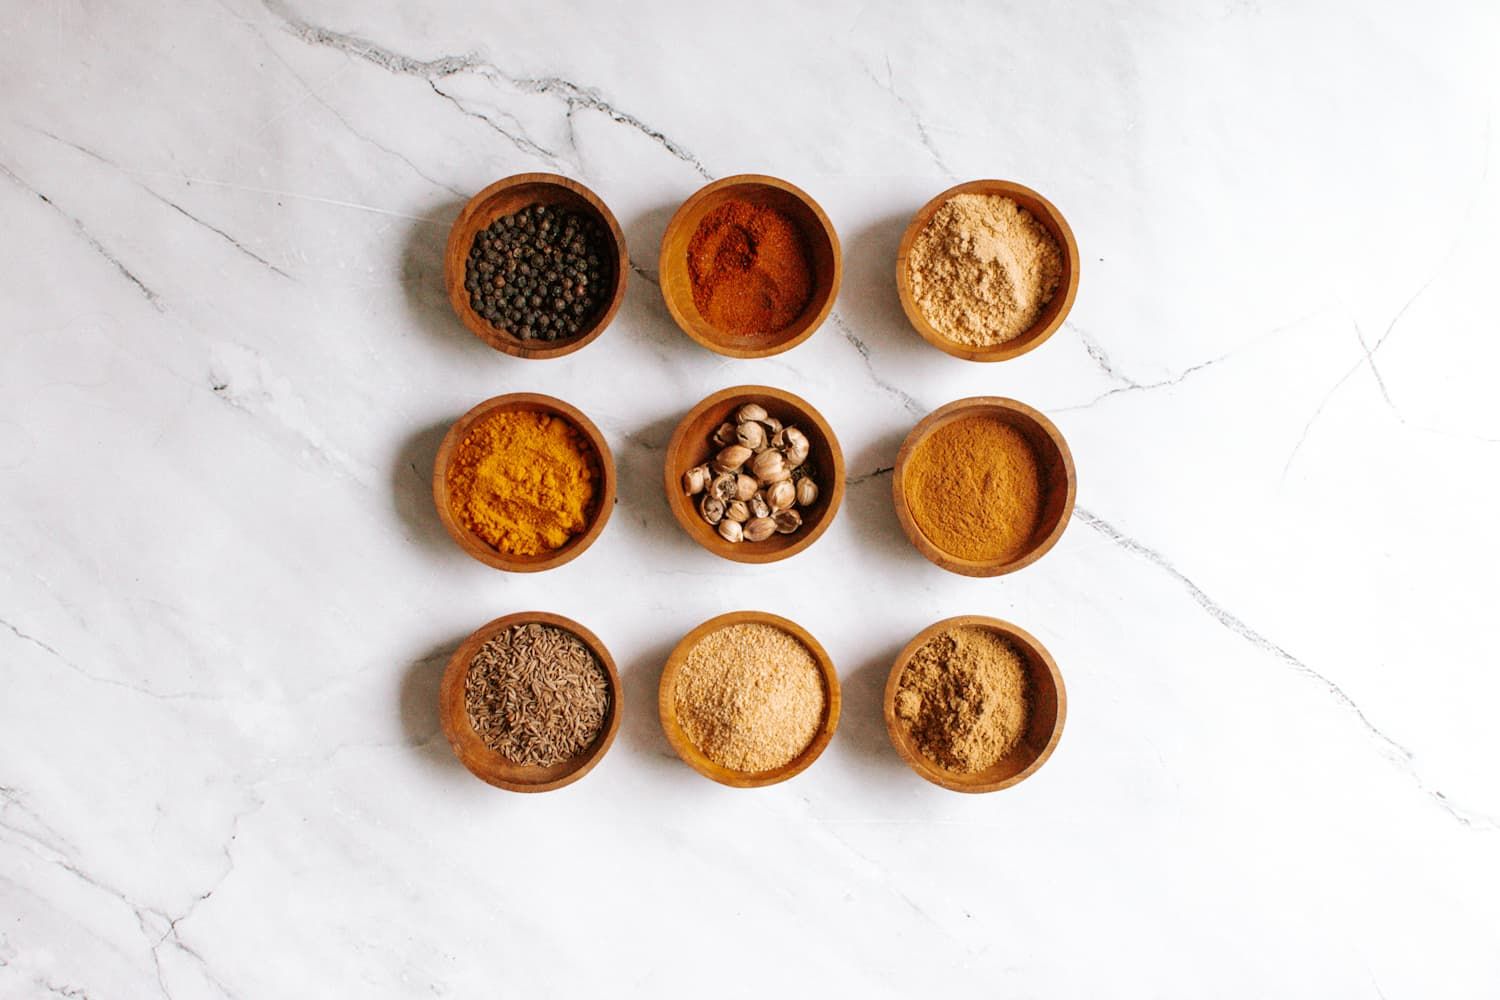 The spices needed  for curry powder in small wooden bowls including cumin, coriander, cardamom, and other spices.